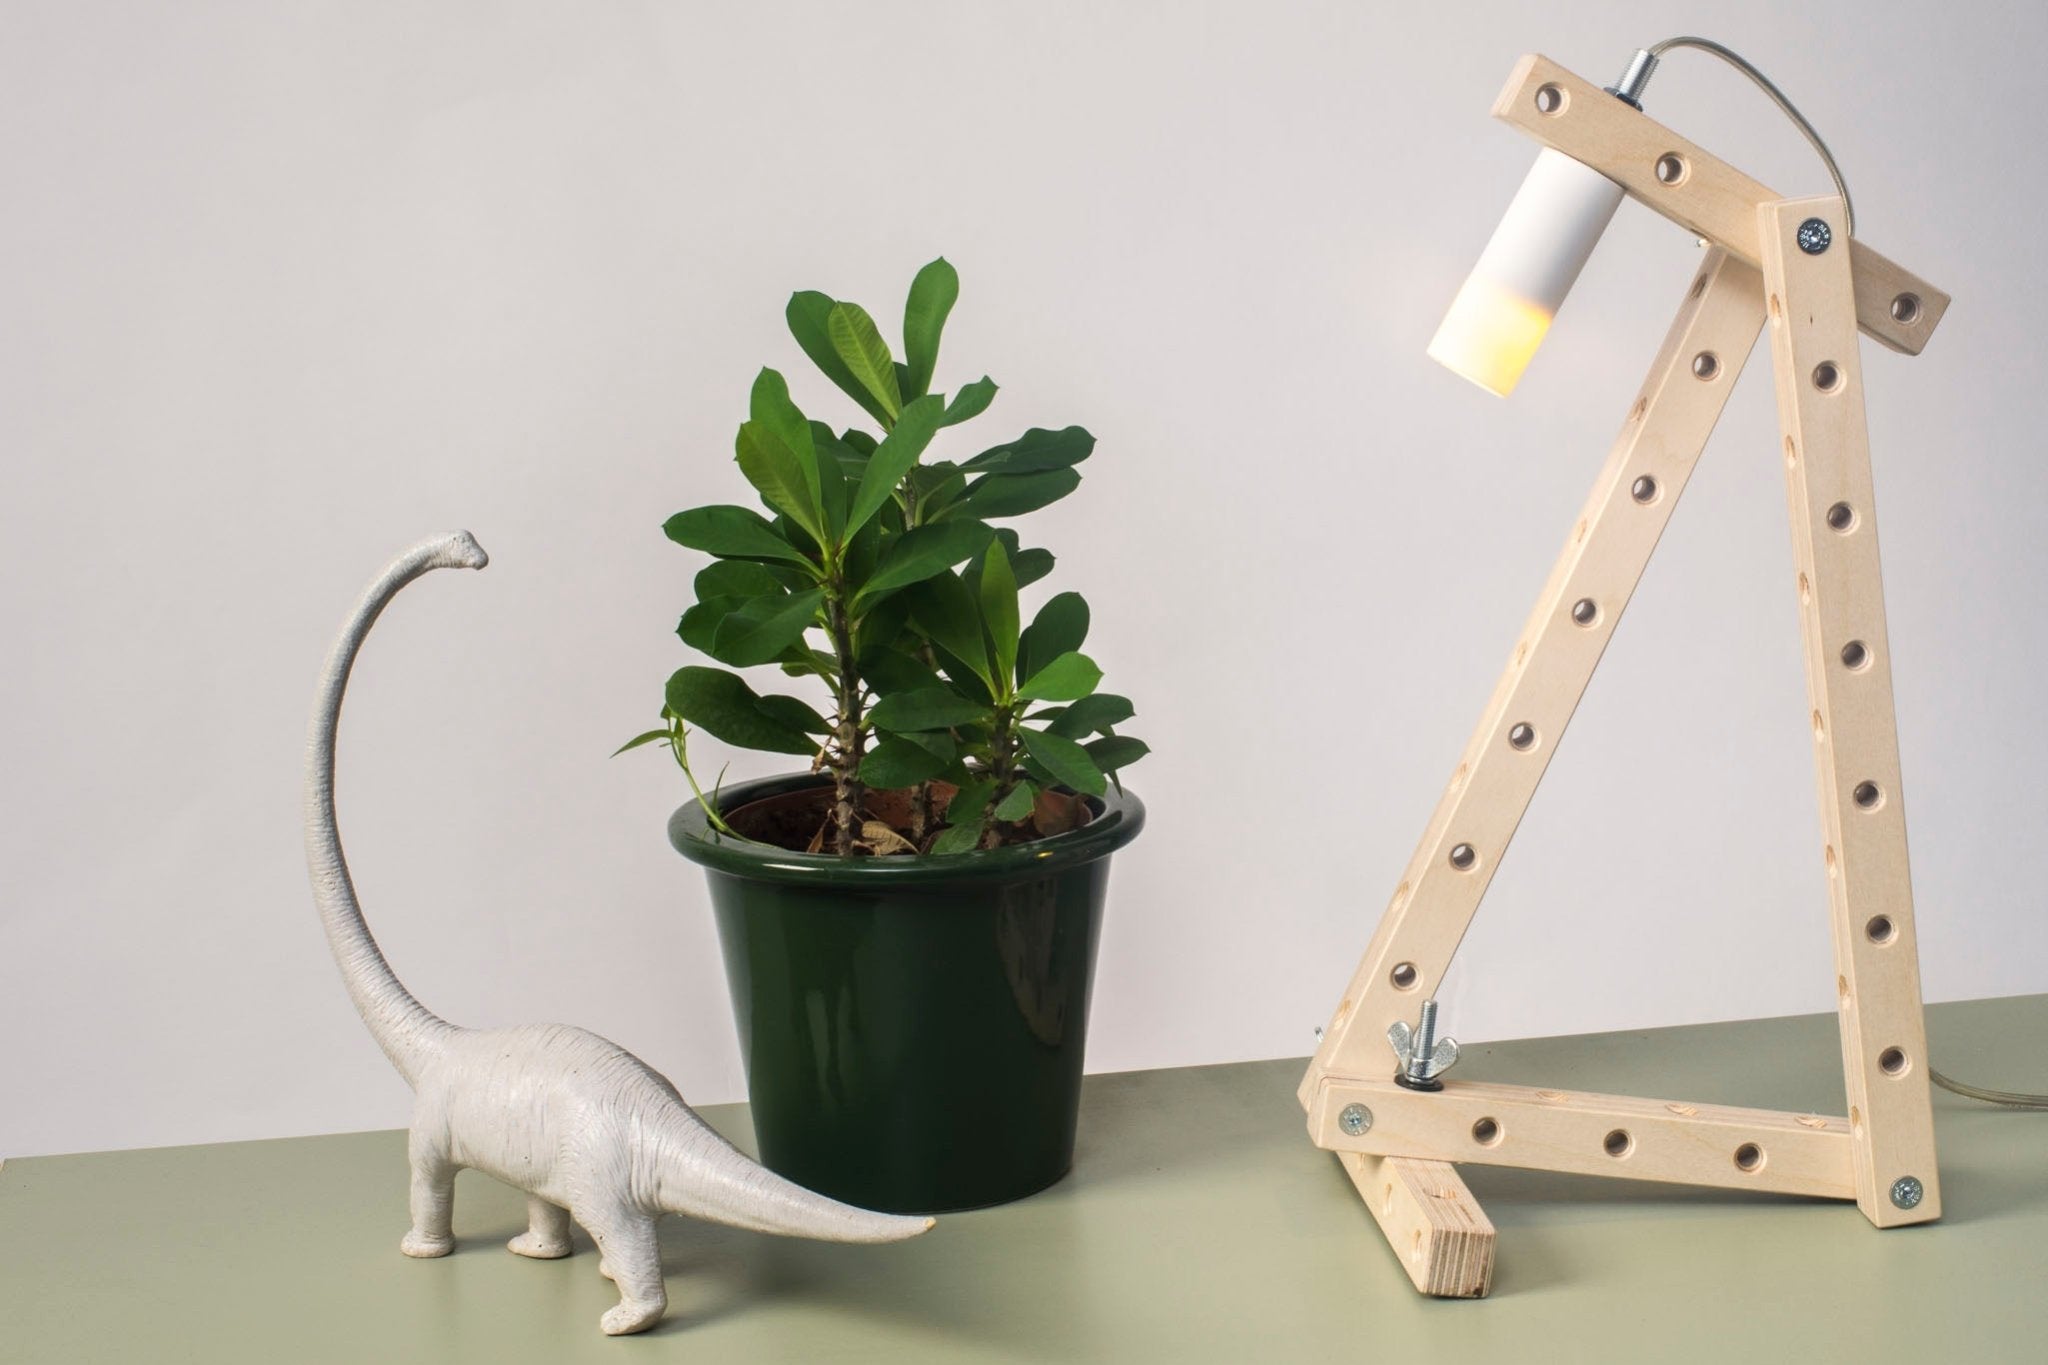 24mm Transformable table lamp - gimmiigimmii